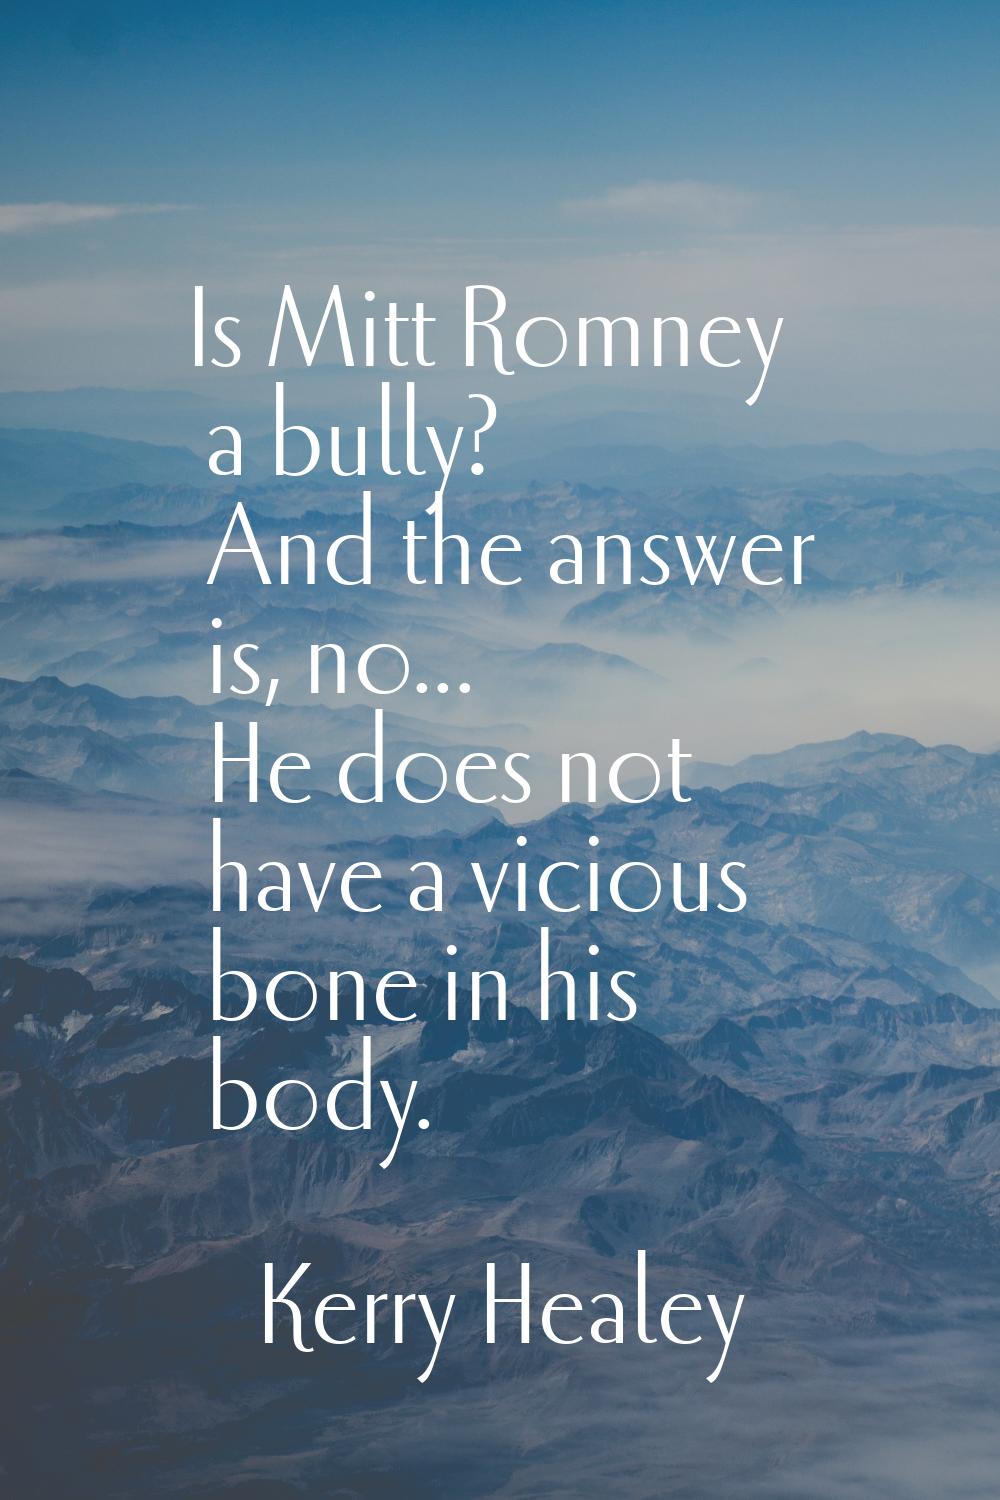 Is Mitt Romney a bully? And the answer is, no... He does not have a vicious bone in his body.